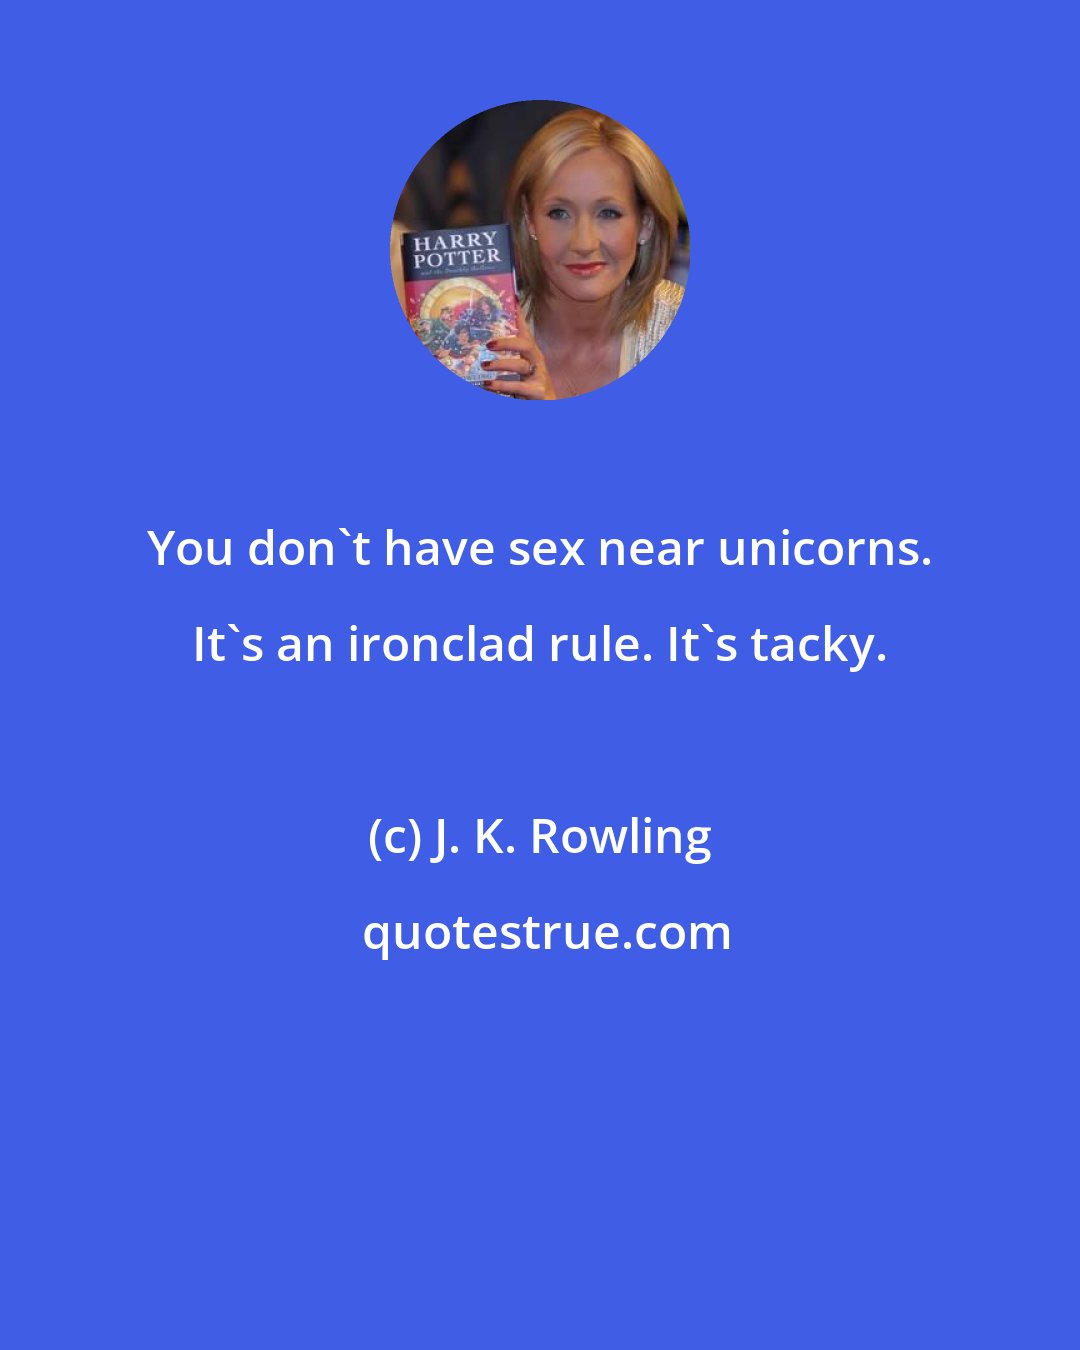 J. K. Rowling: You don't have sex near unicorns. It's an ironclad rule. It's tacky.